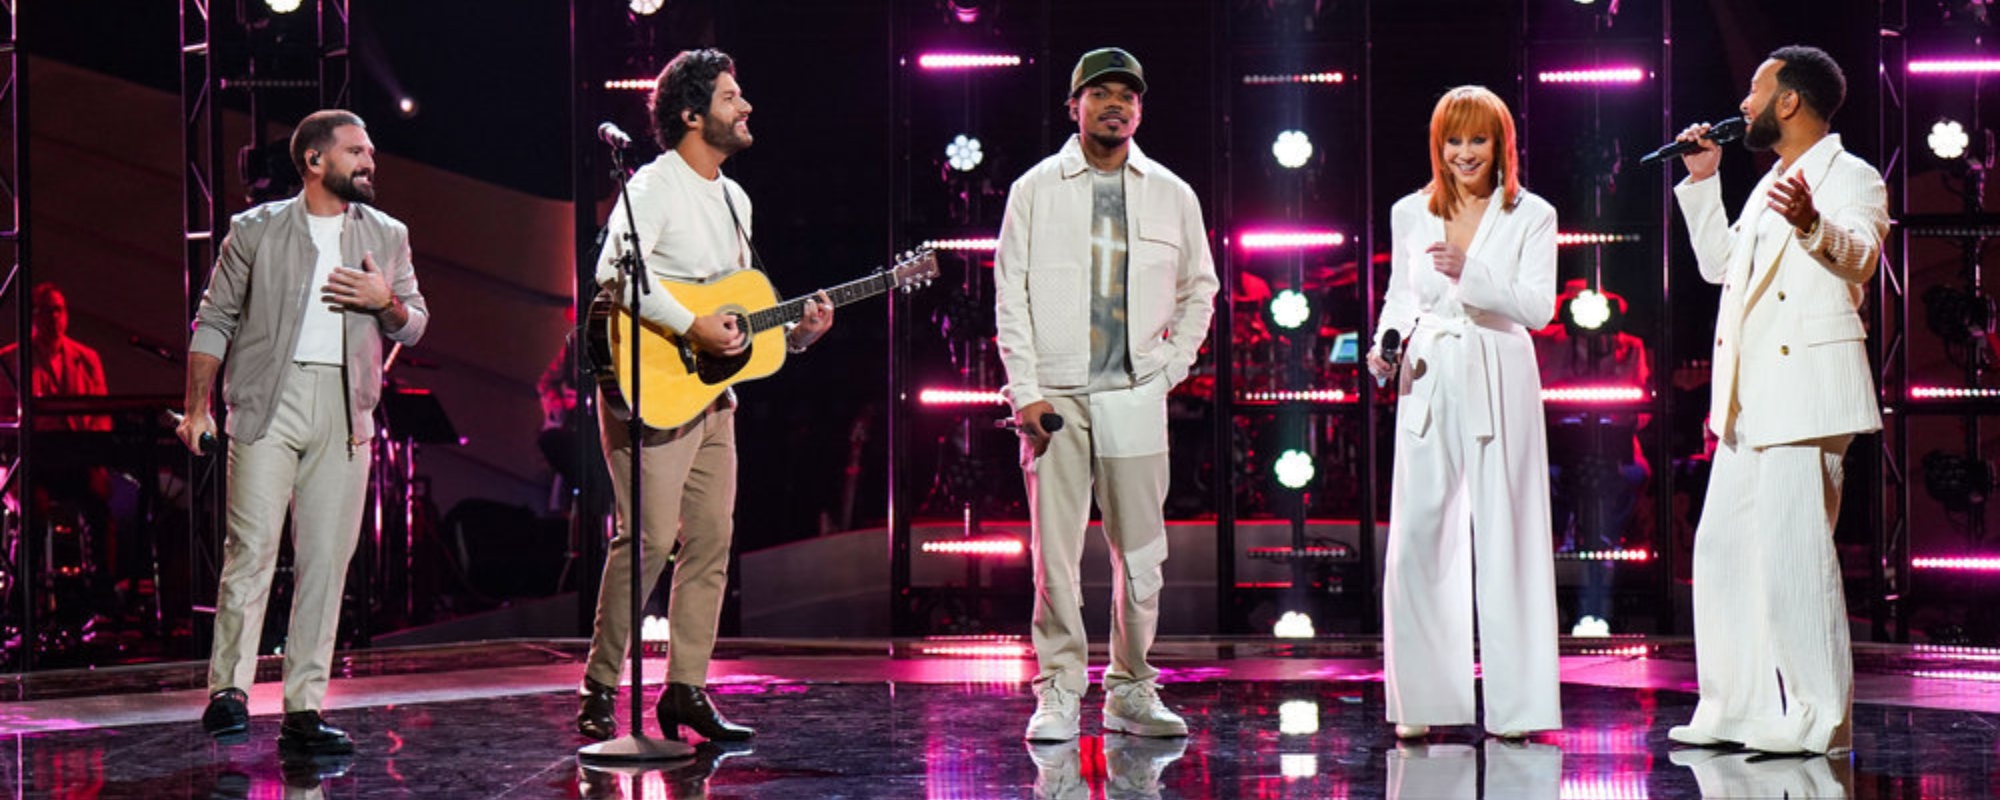 ‘The Voice’ Season 25, Episode 1 Full Recap: Every Blind Audition and Who They Chose as Their Coach